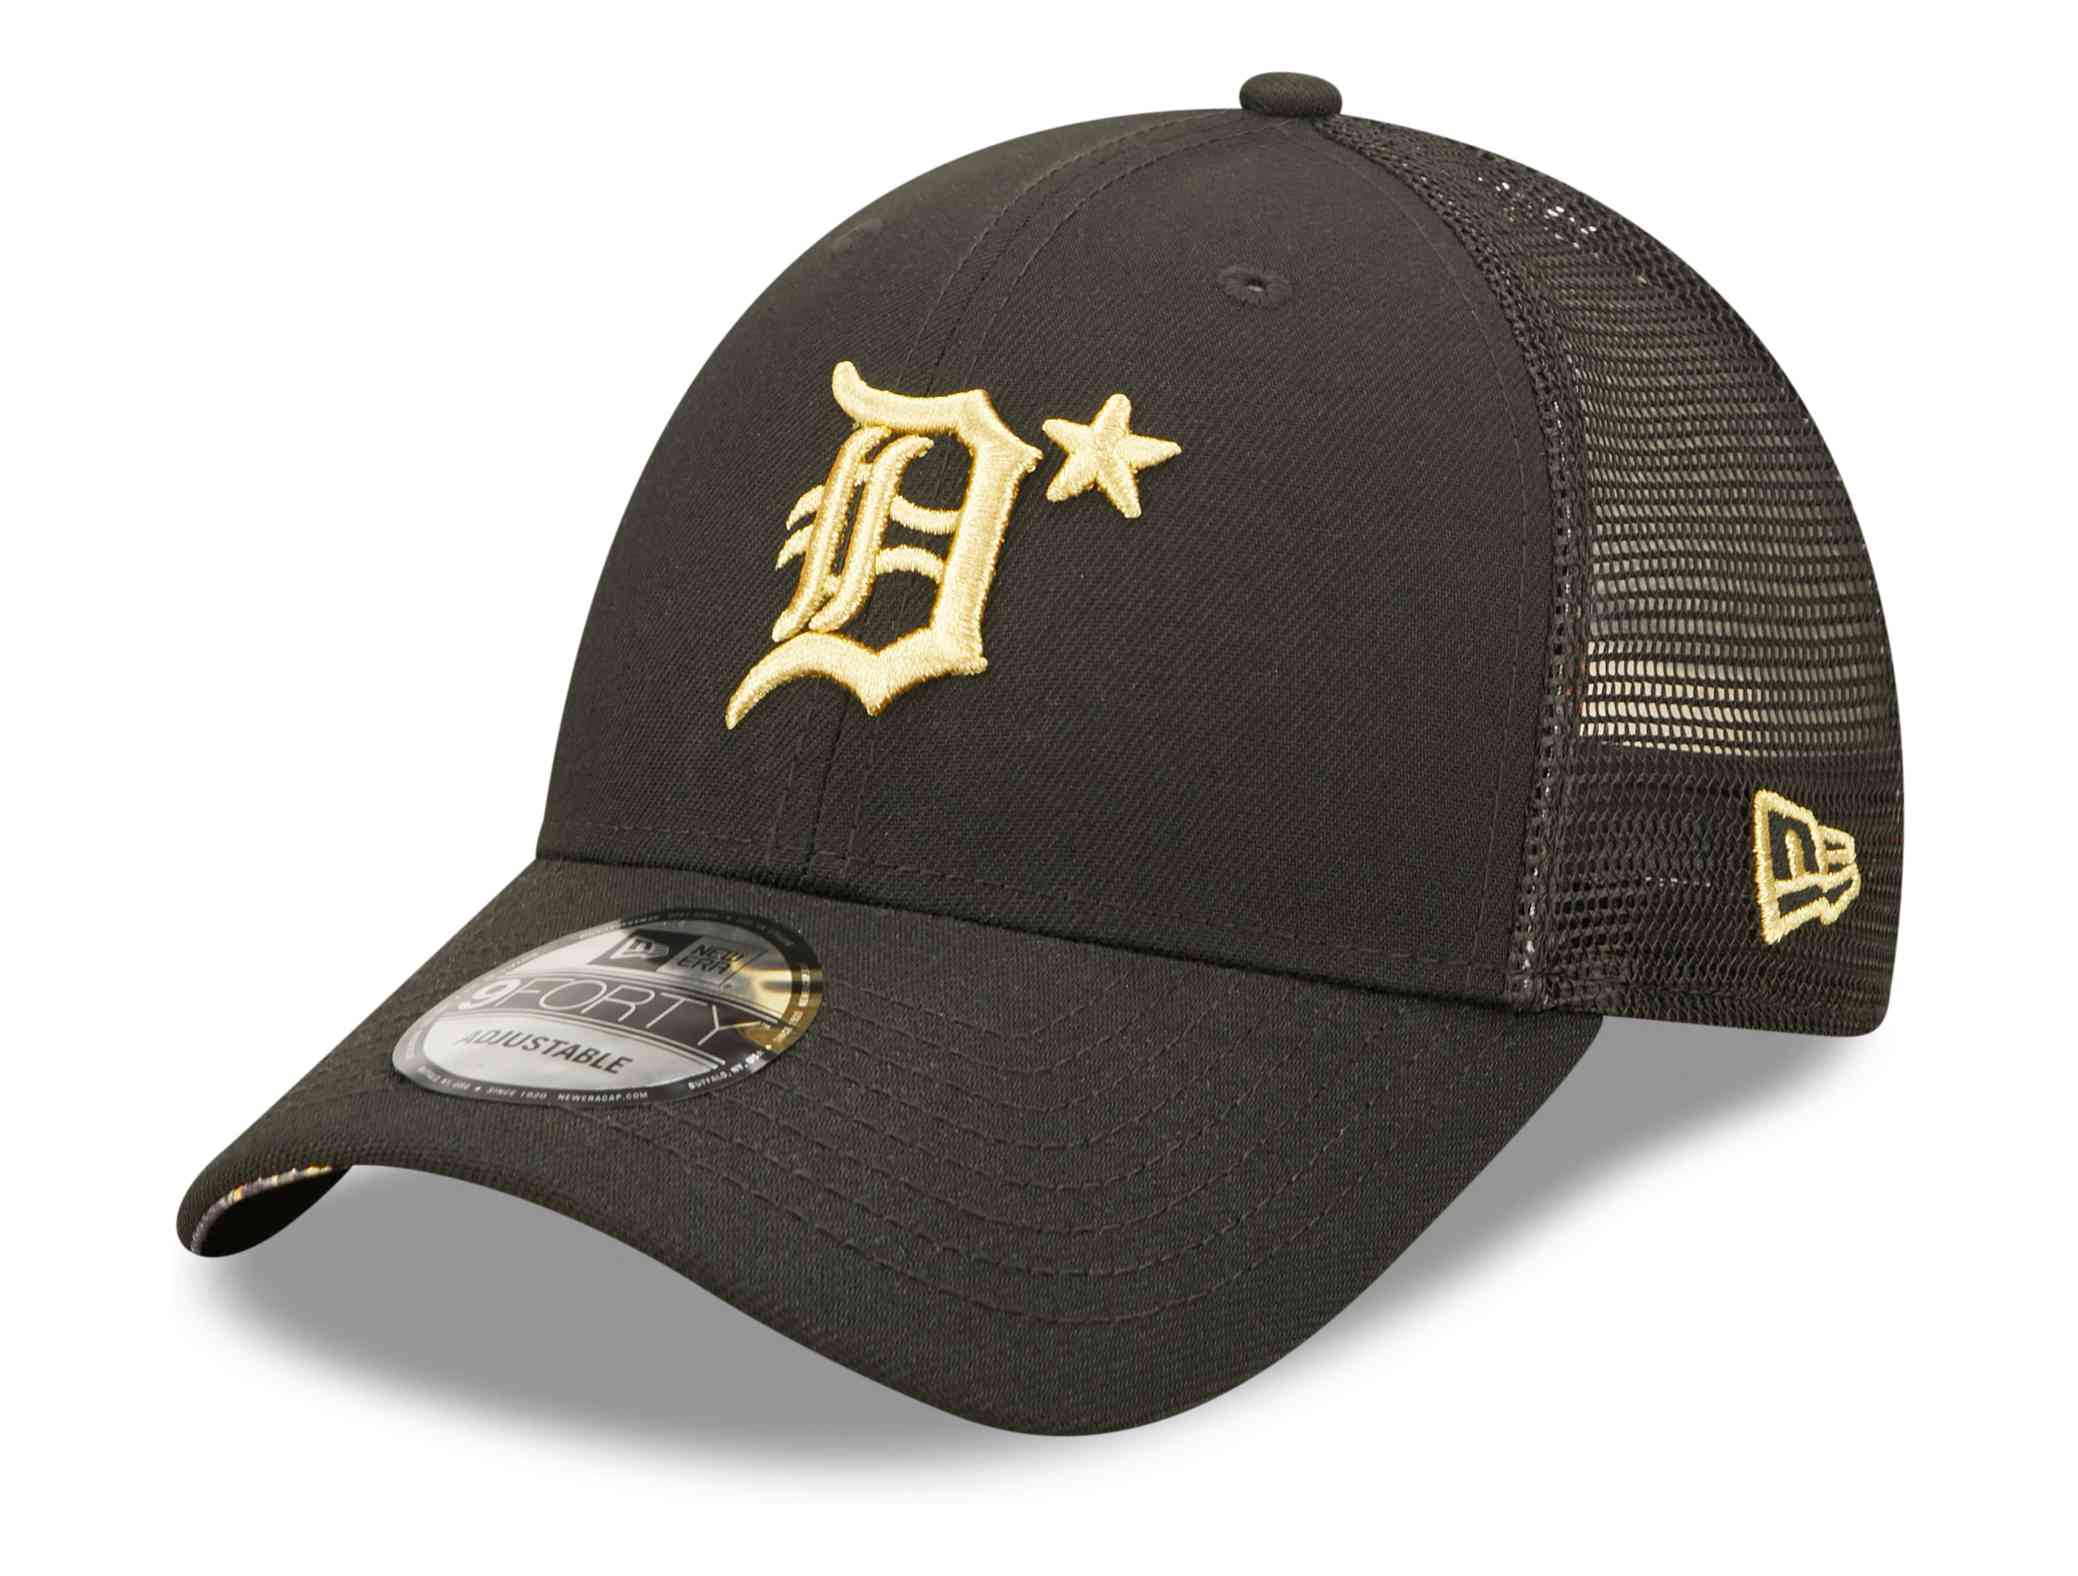 New Era - MLB Detroit Tigers All Star Game Patch 9Forty Snapback Cap